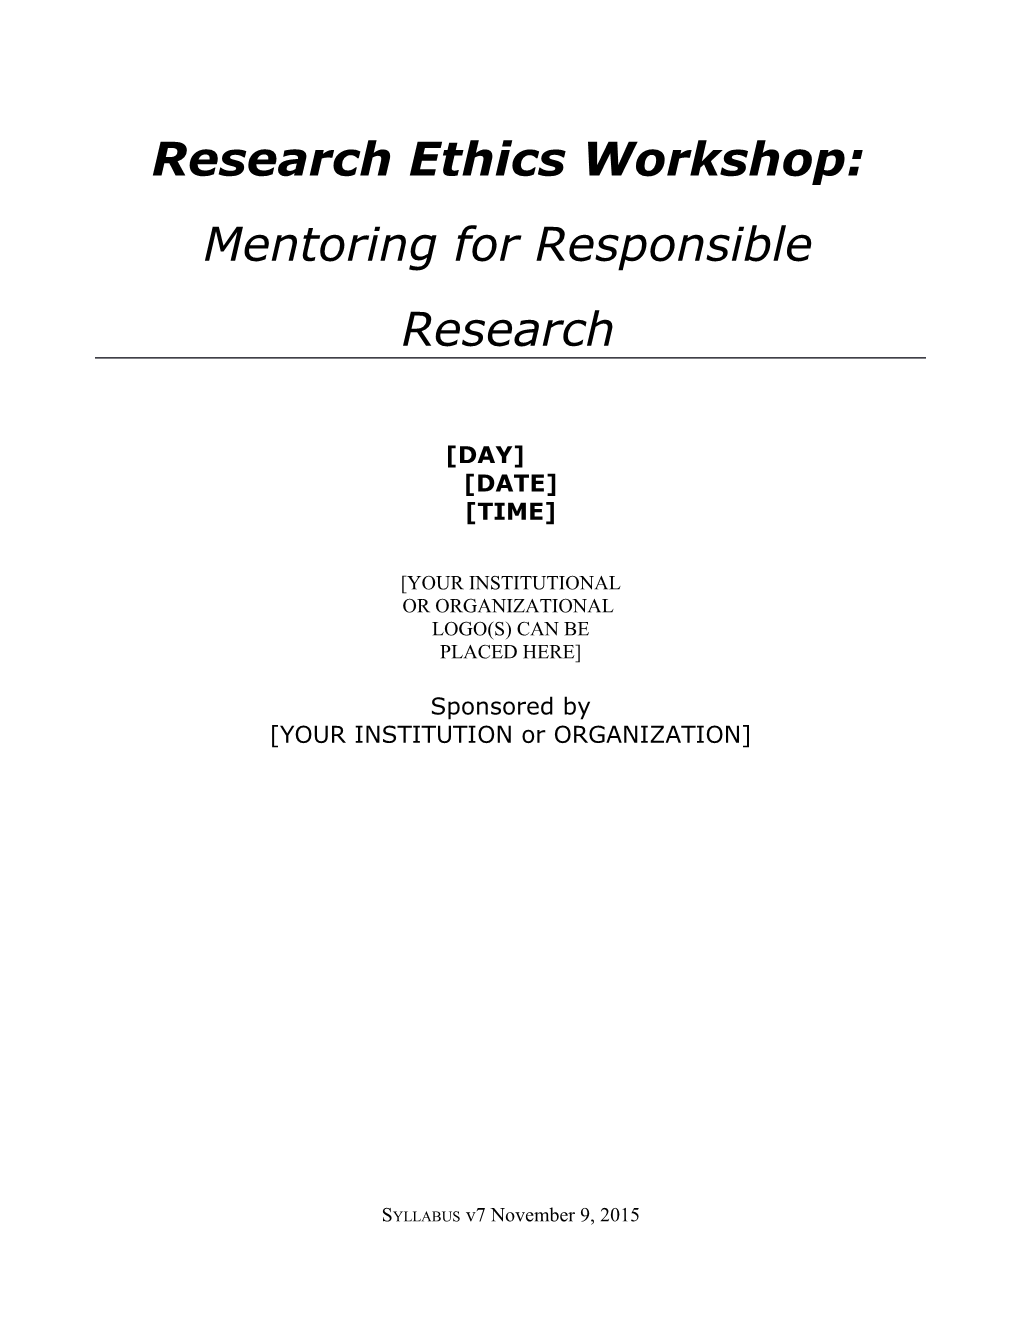 Research Ethics Education: Resources